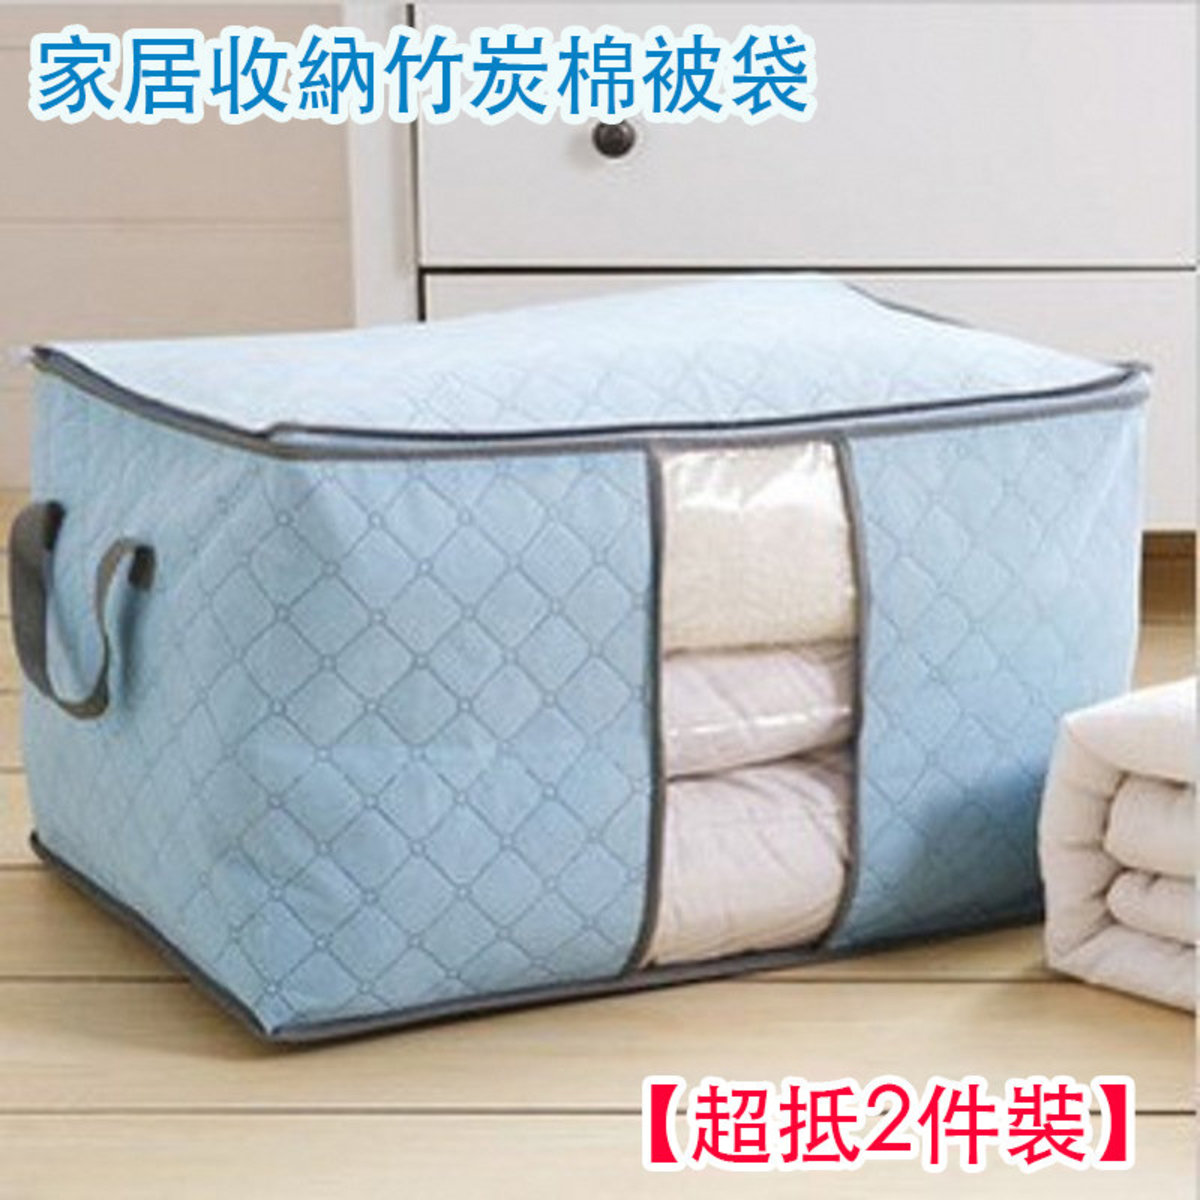 【2pack】Home storage bamboo charcoal quilt bag Non-woven Clothing finishing bag - blue